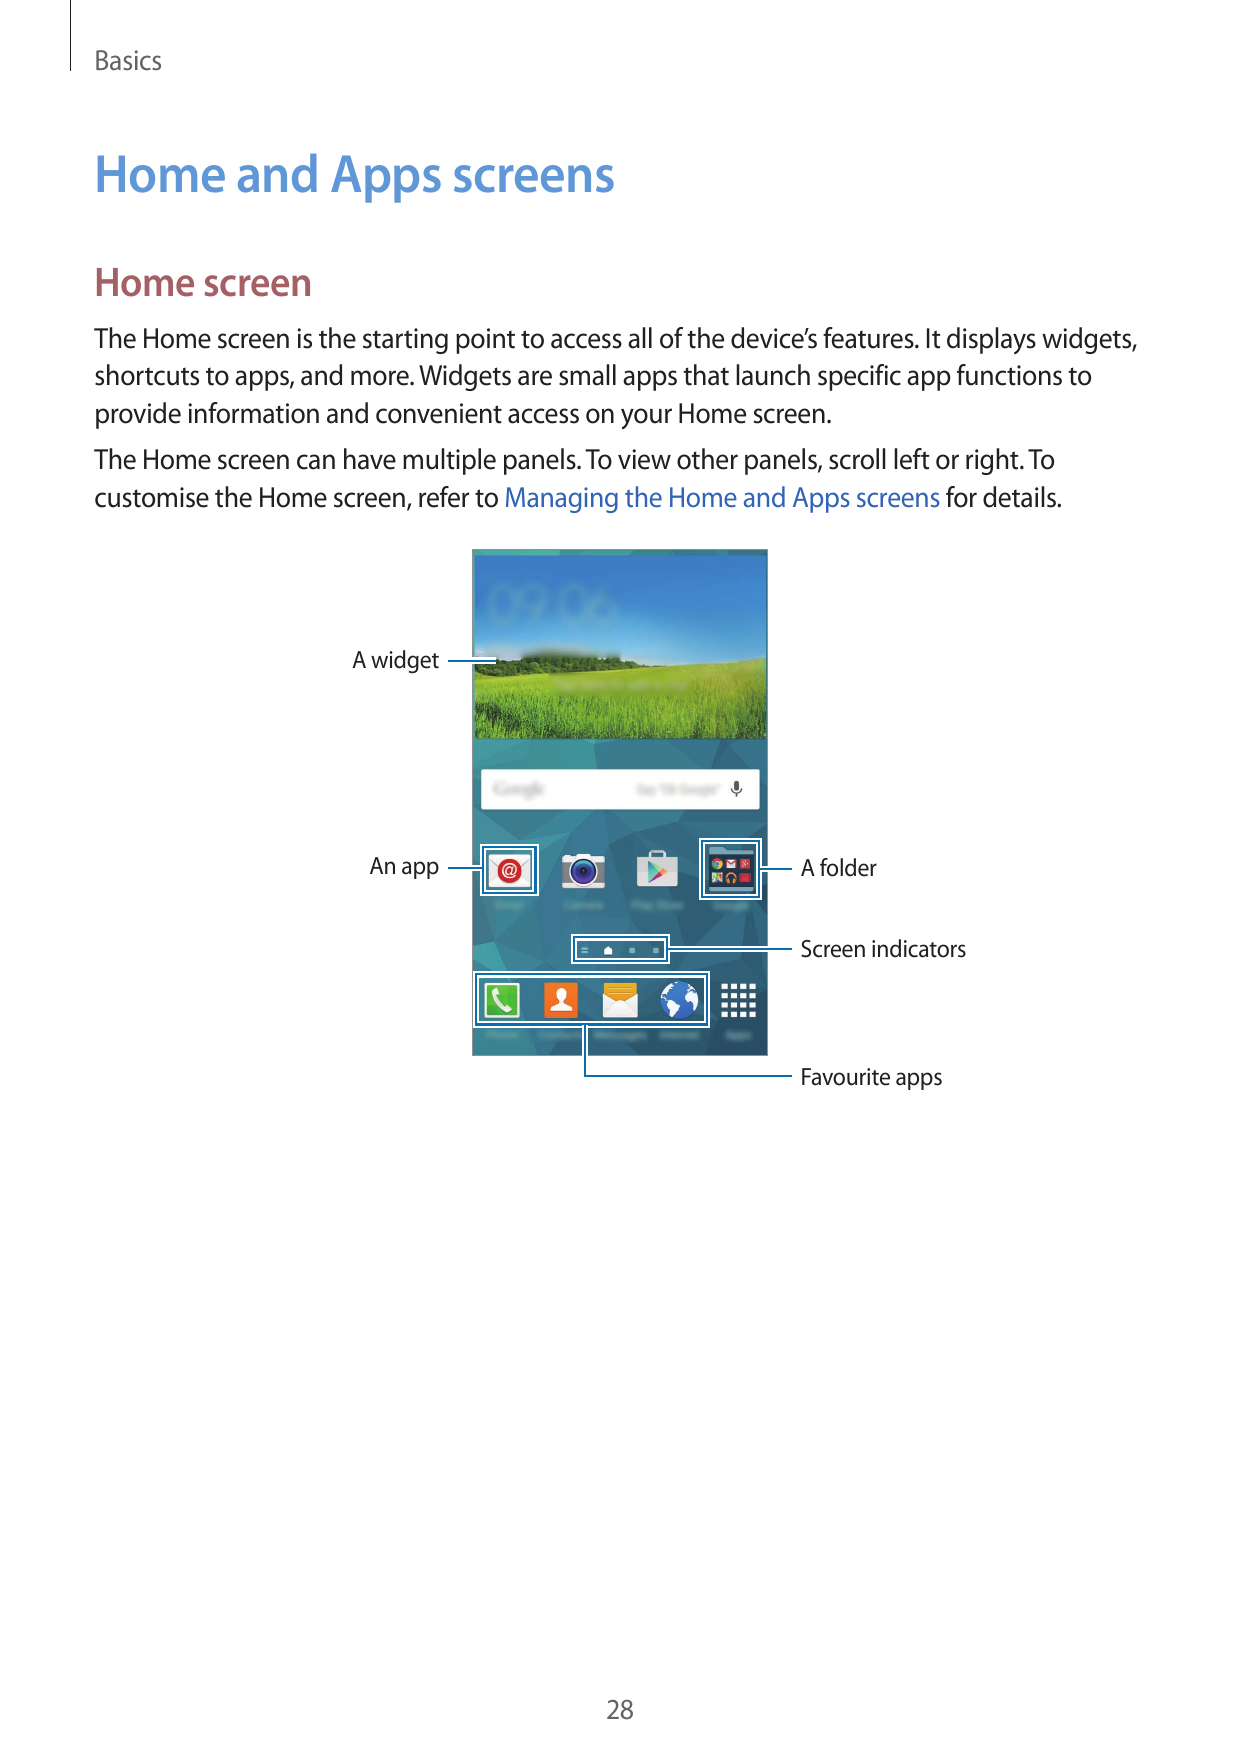 BasicsHome and Apps screensHome screenThe Home screen is the starting point to access all of the device’s features. It displays 